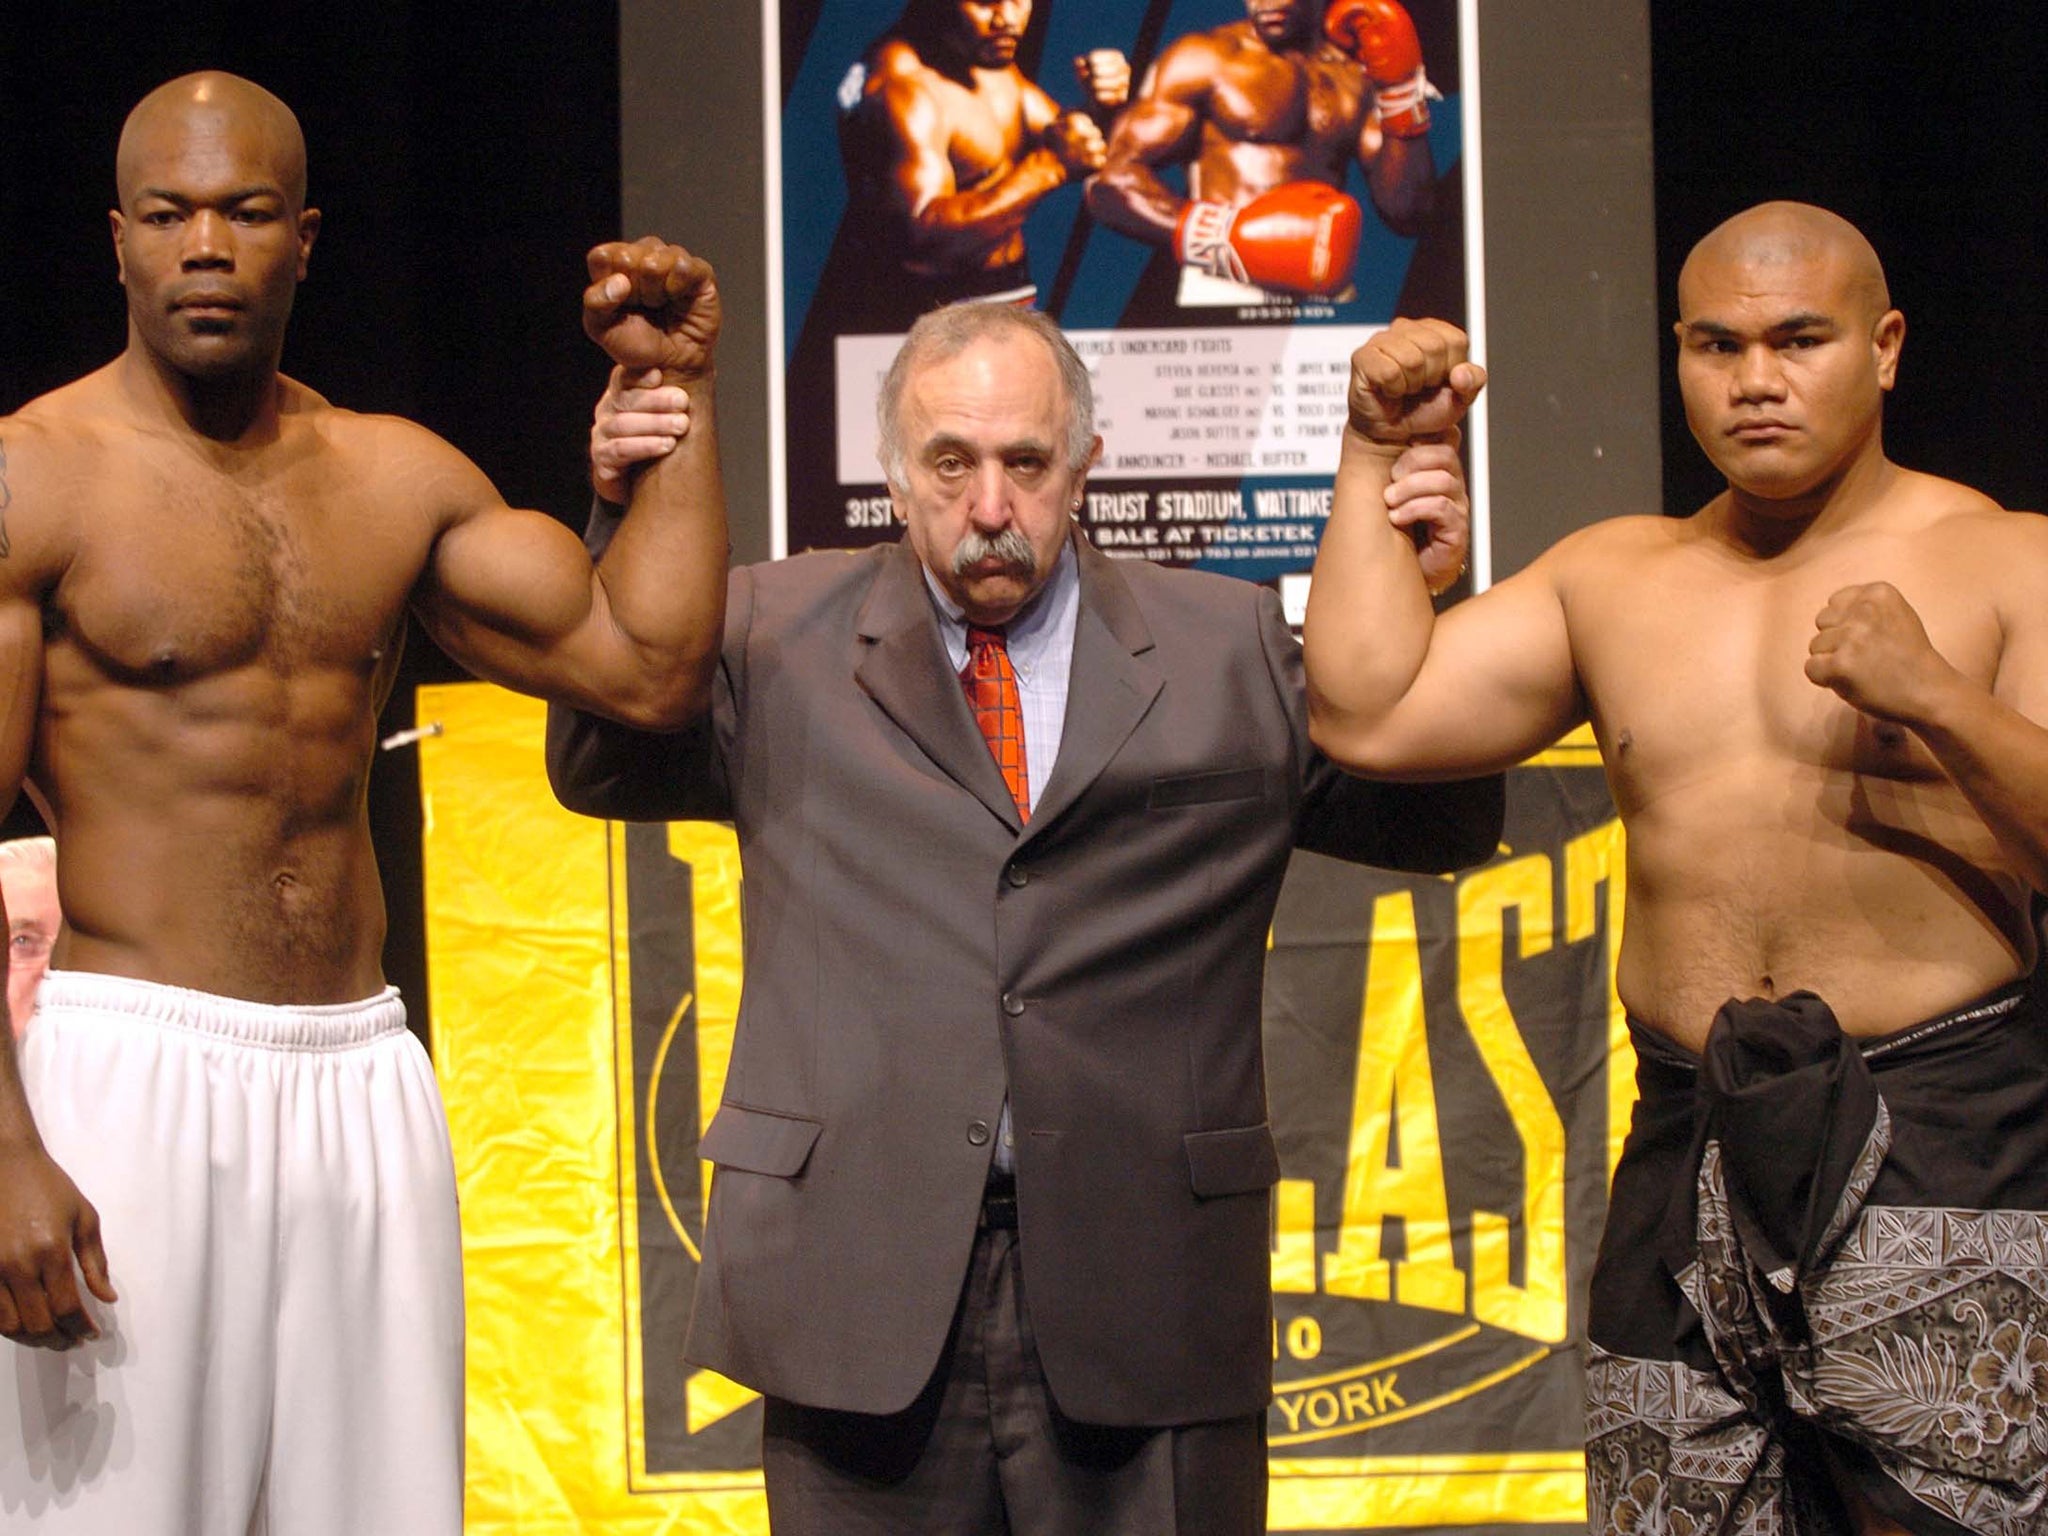 Kushner in Auckland in 2005 with Talmadge Griffis, left, and David Tua; by then his career was in decline